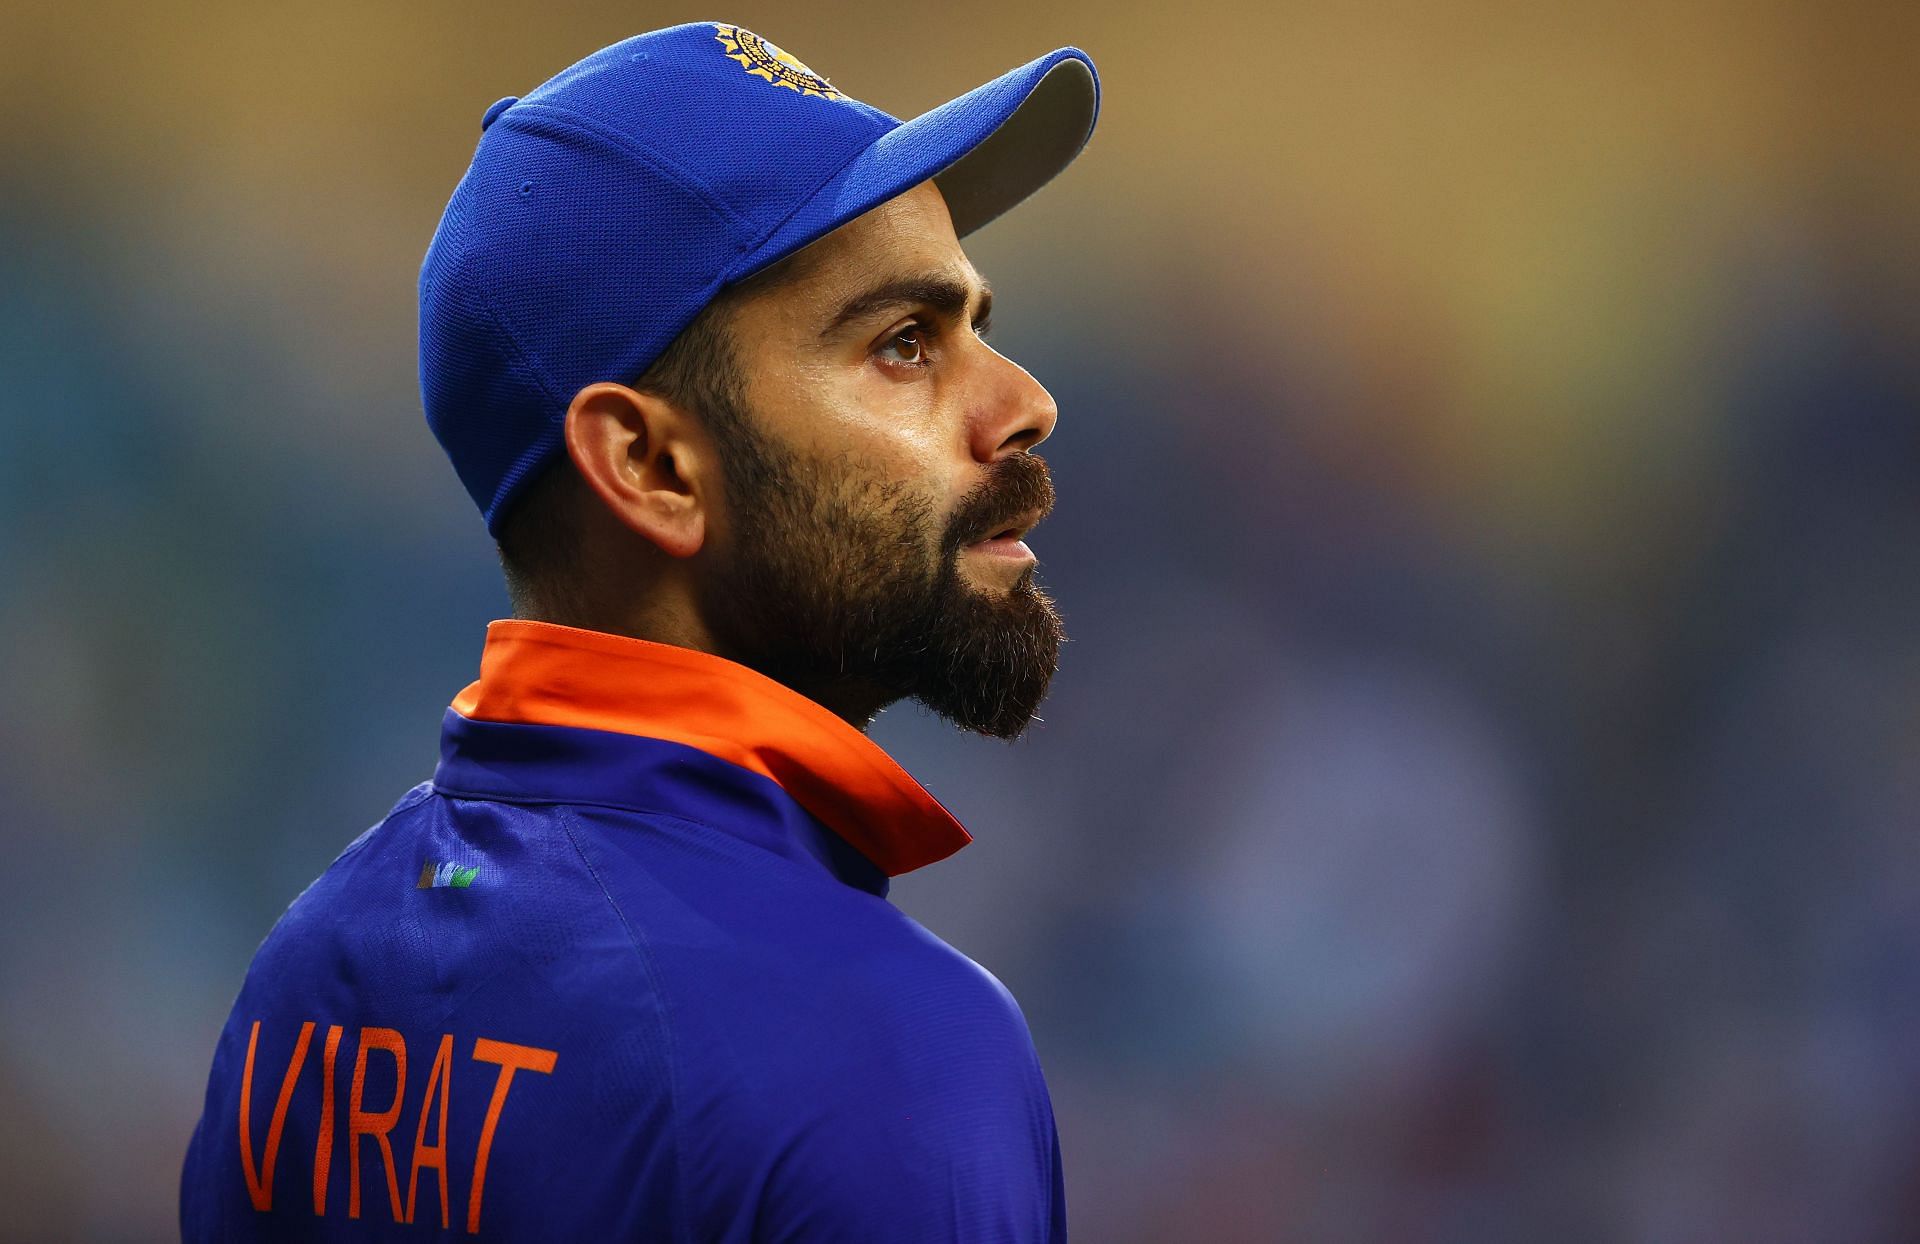 Fans angry after BCCI’s tweet targeted indirectly Ex-skipper Kohli